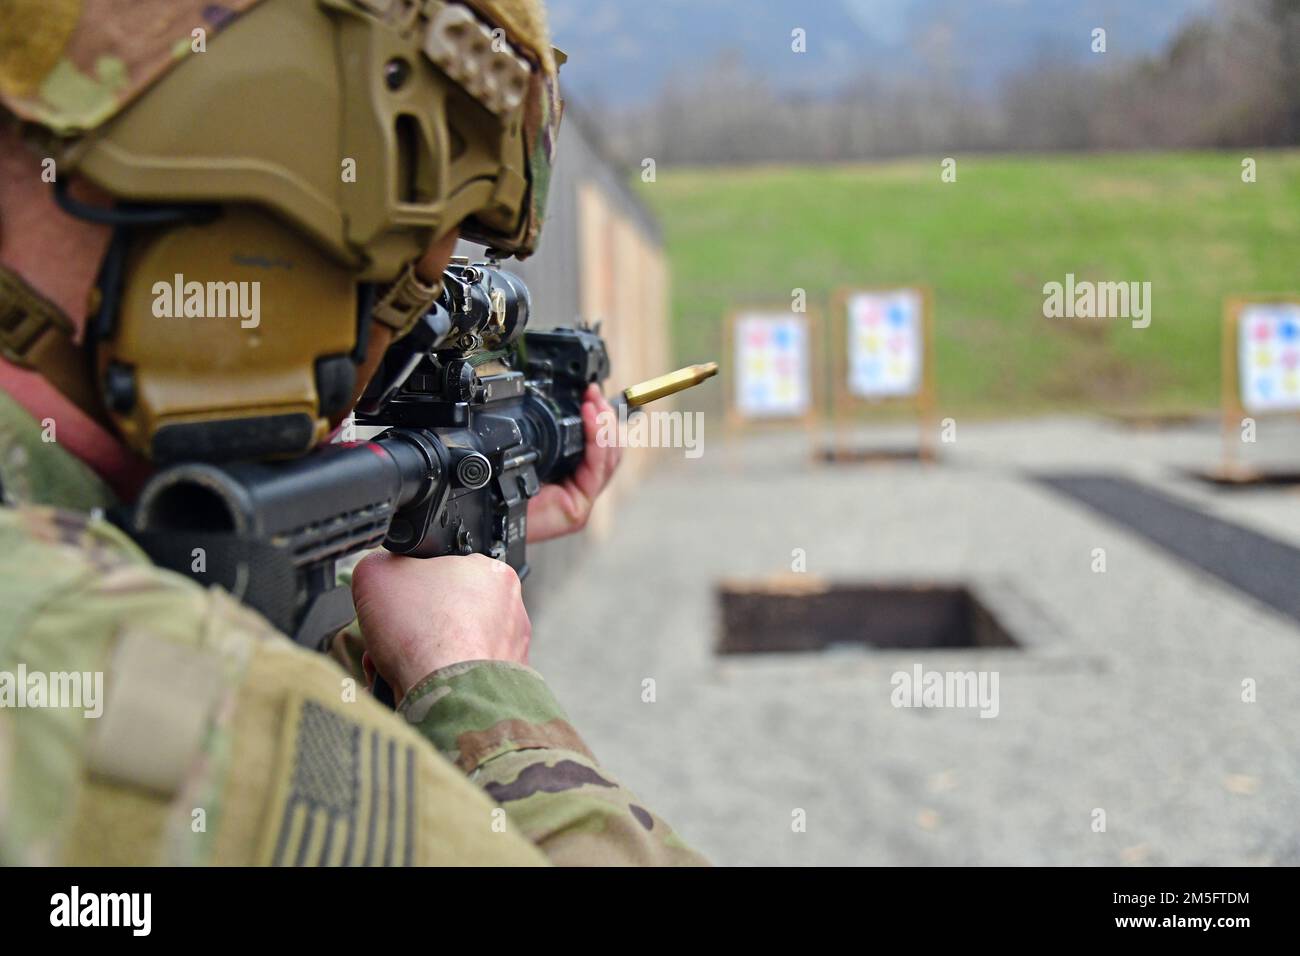 A U.S. Army Paratrooper, assigned to the 1st Battalion, 503rd Infantry Regiment, 173rd Airborne Brigade, engages targets with an  M4 carbine during marksmanship training at Cao Malnisio Range, Pordenone, Italy, March 15, 2022. The 173rd Airborne Brigade is the U.S. Army’s Contingency Response Force in Europe, providing rapidly deployable forces to United States European, African, and Central Command areas of responsibility. Stock Photo